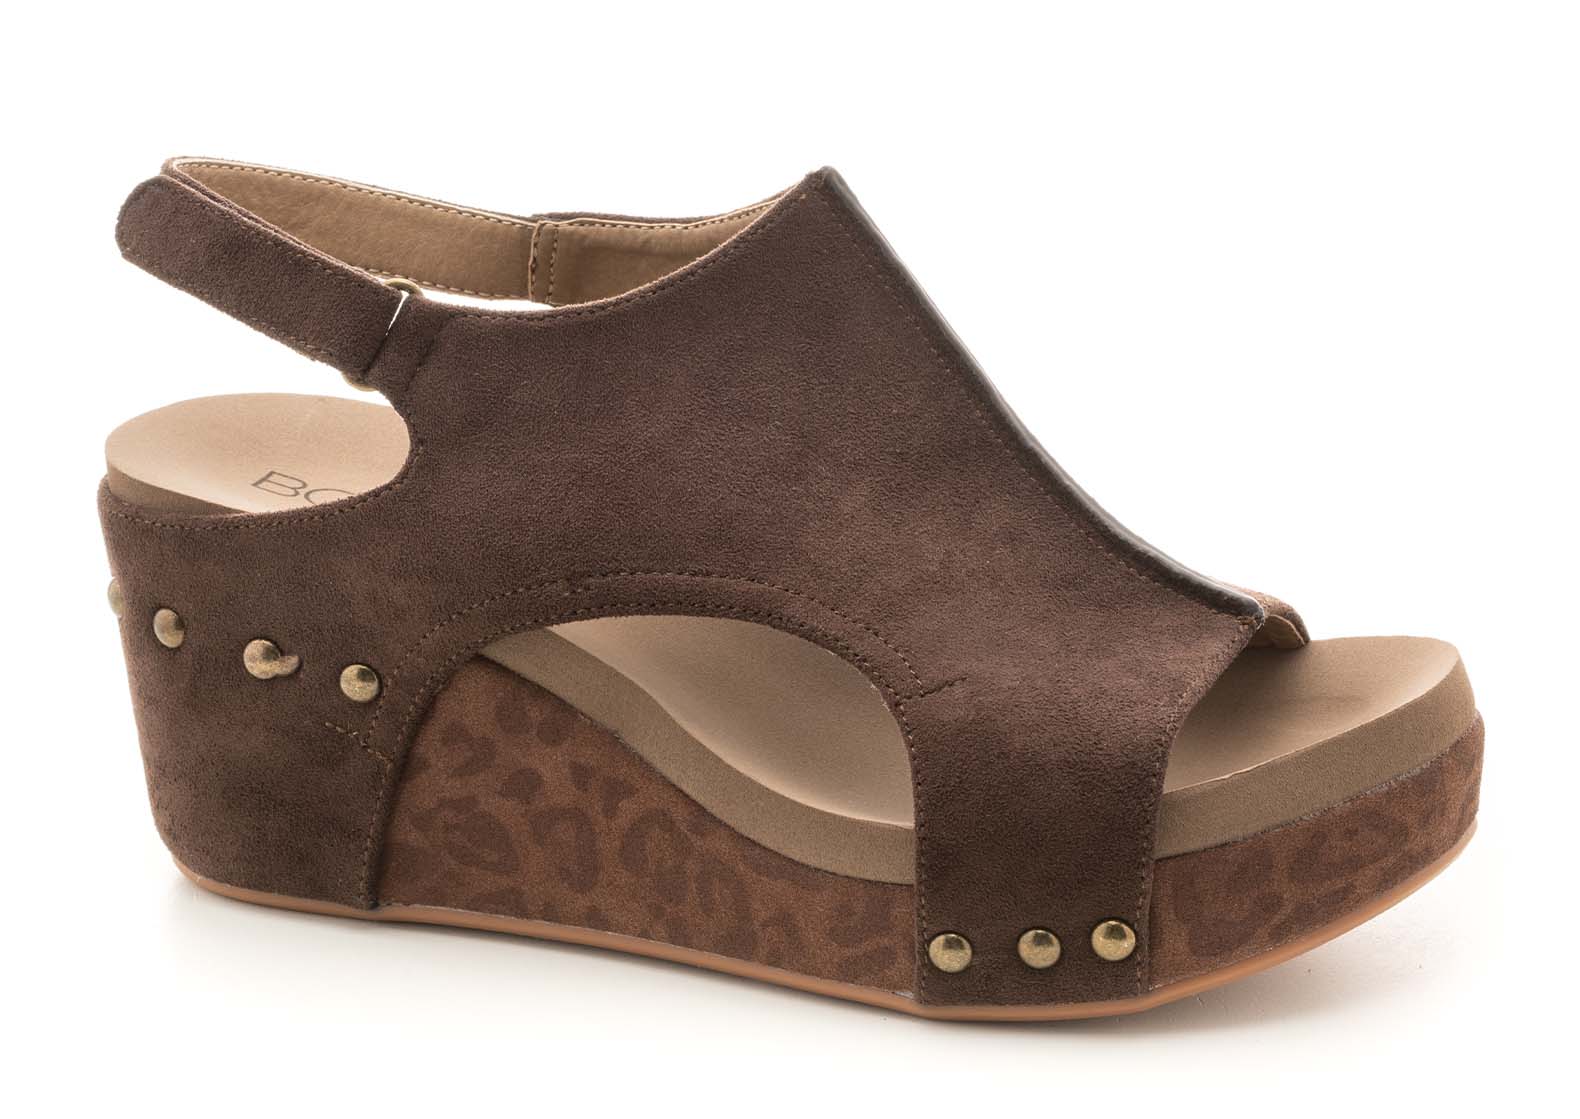 Corkys Shoes- Carley Chocolate/Leopard Wedge  SALE 40% OFF NOW    $42.95